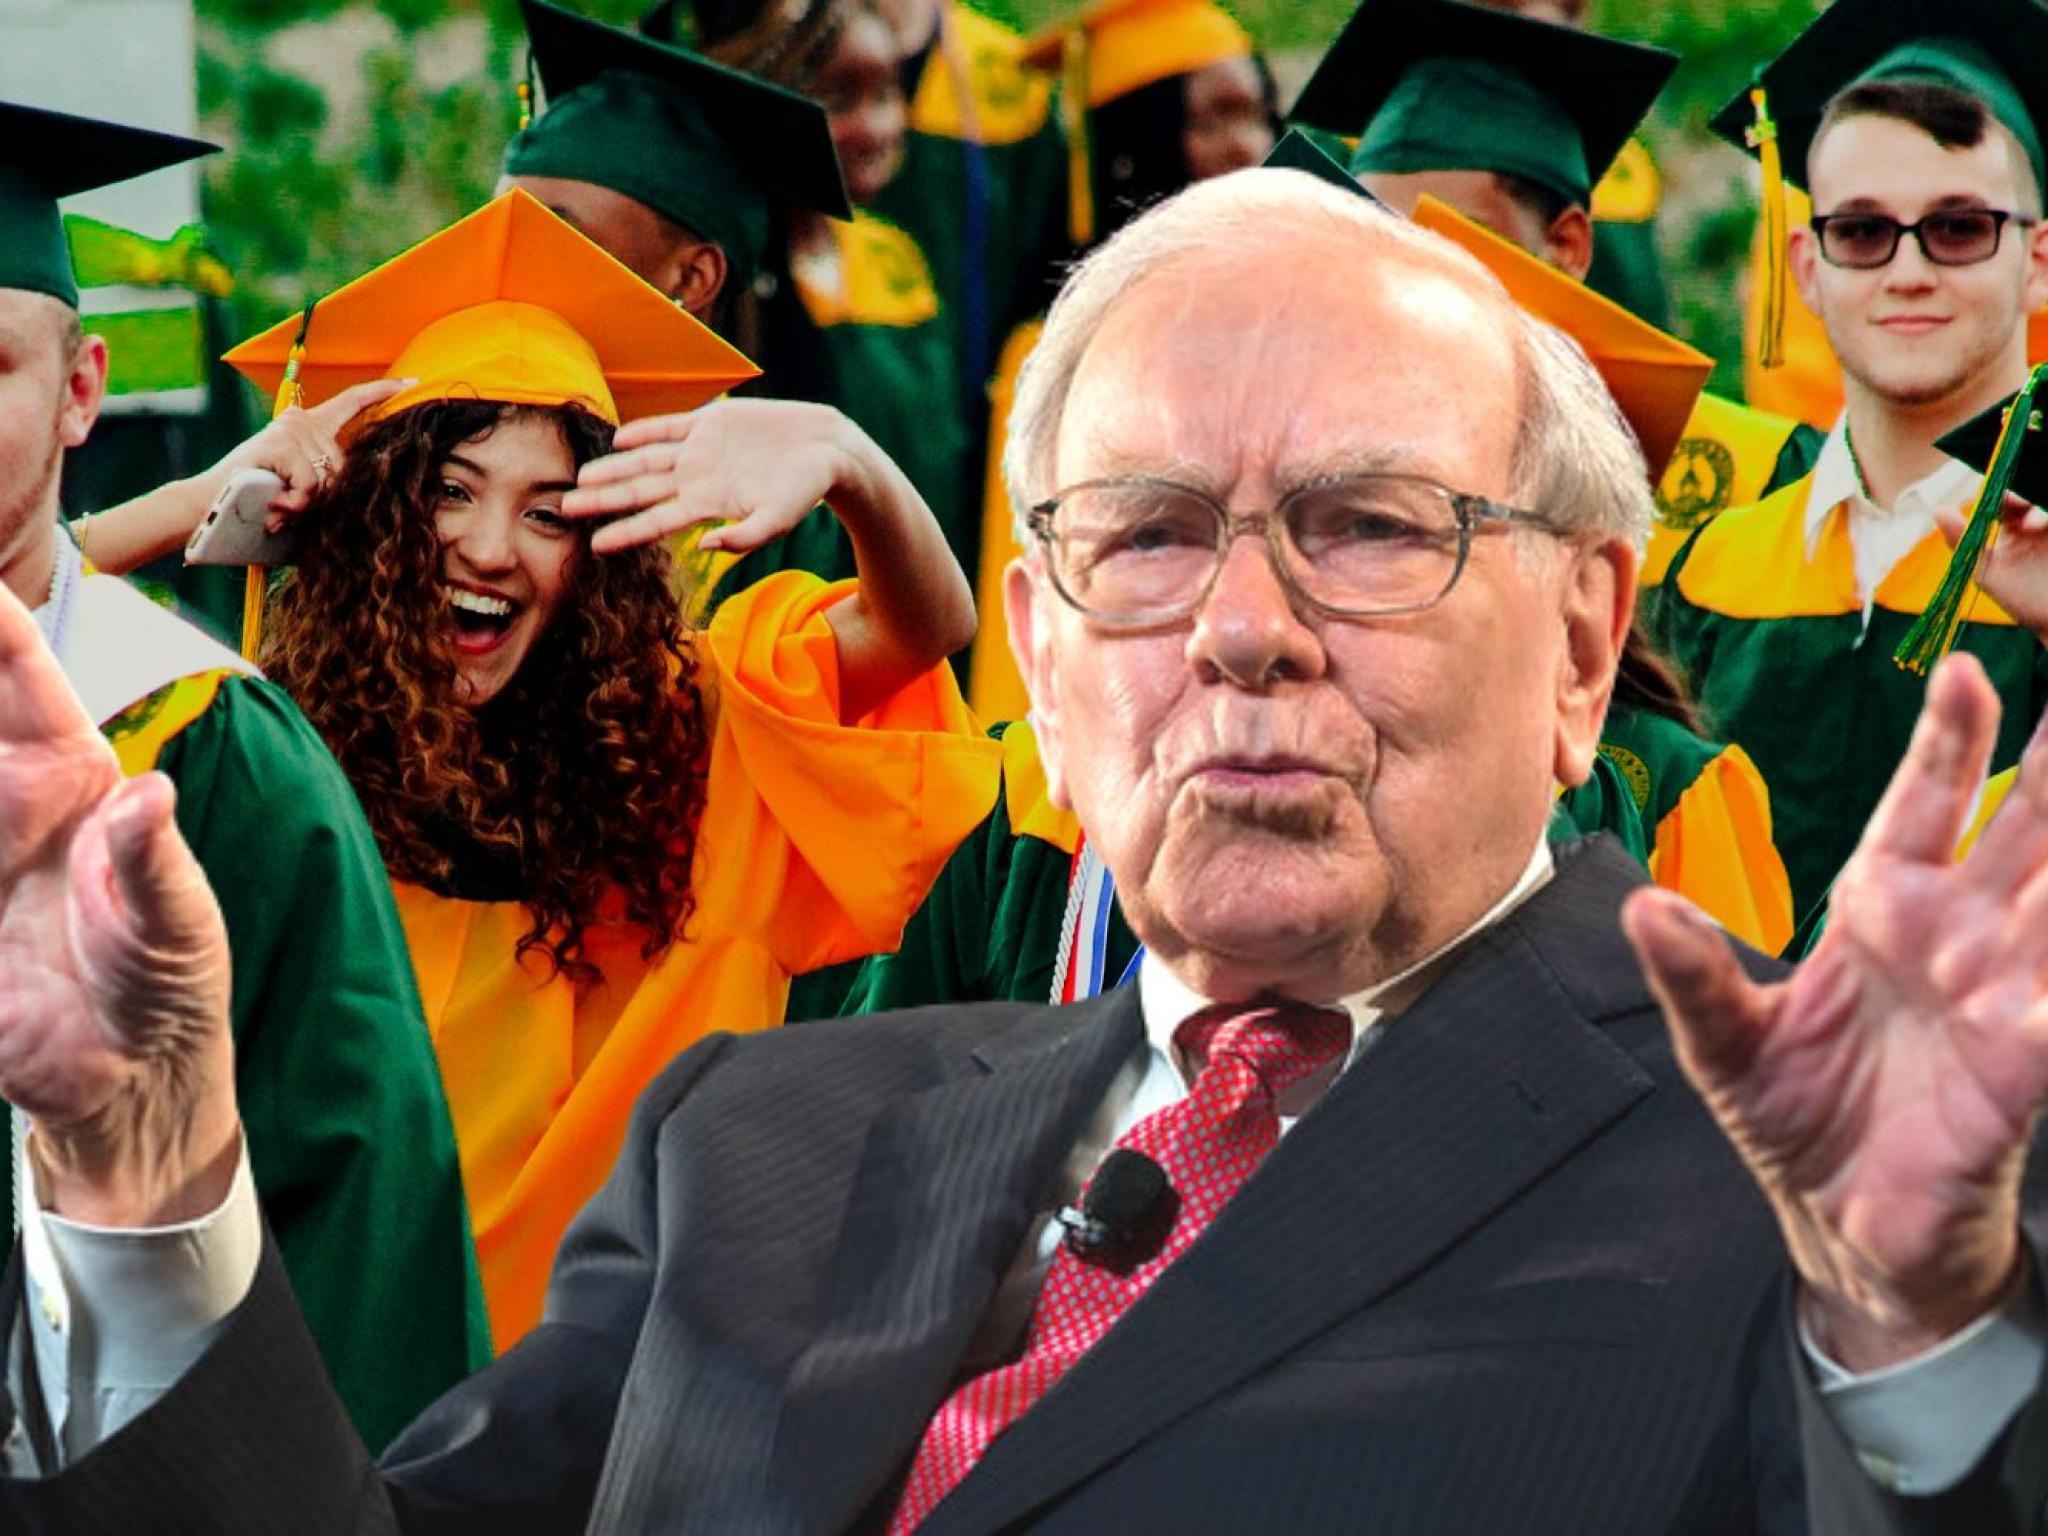  billionaire-warren-buffett-credits-his-success-to-this-100-college-course-he-forced-himself-to-enroll-in 